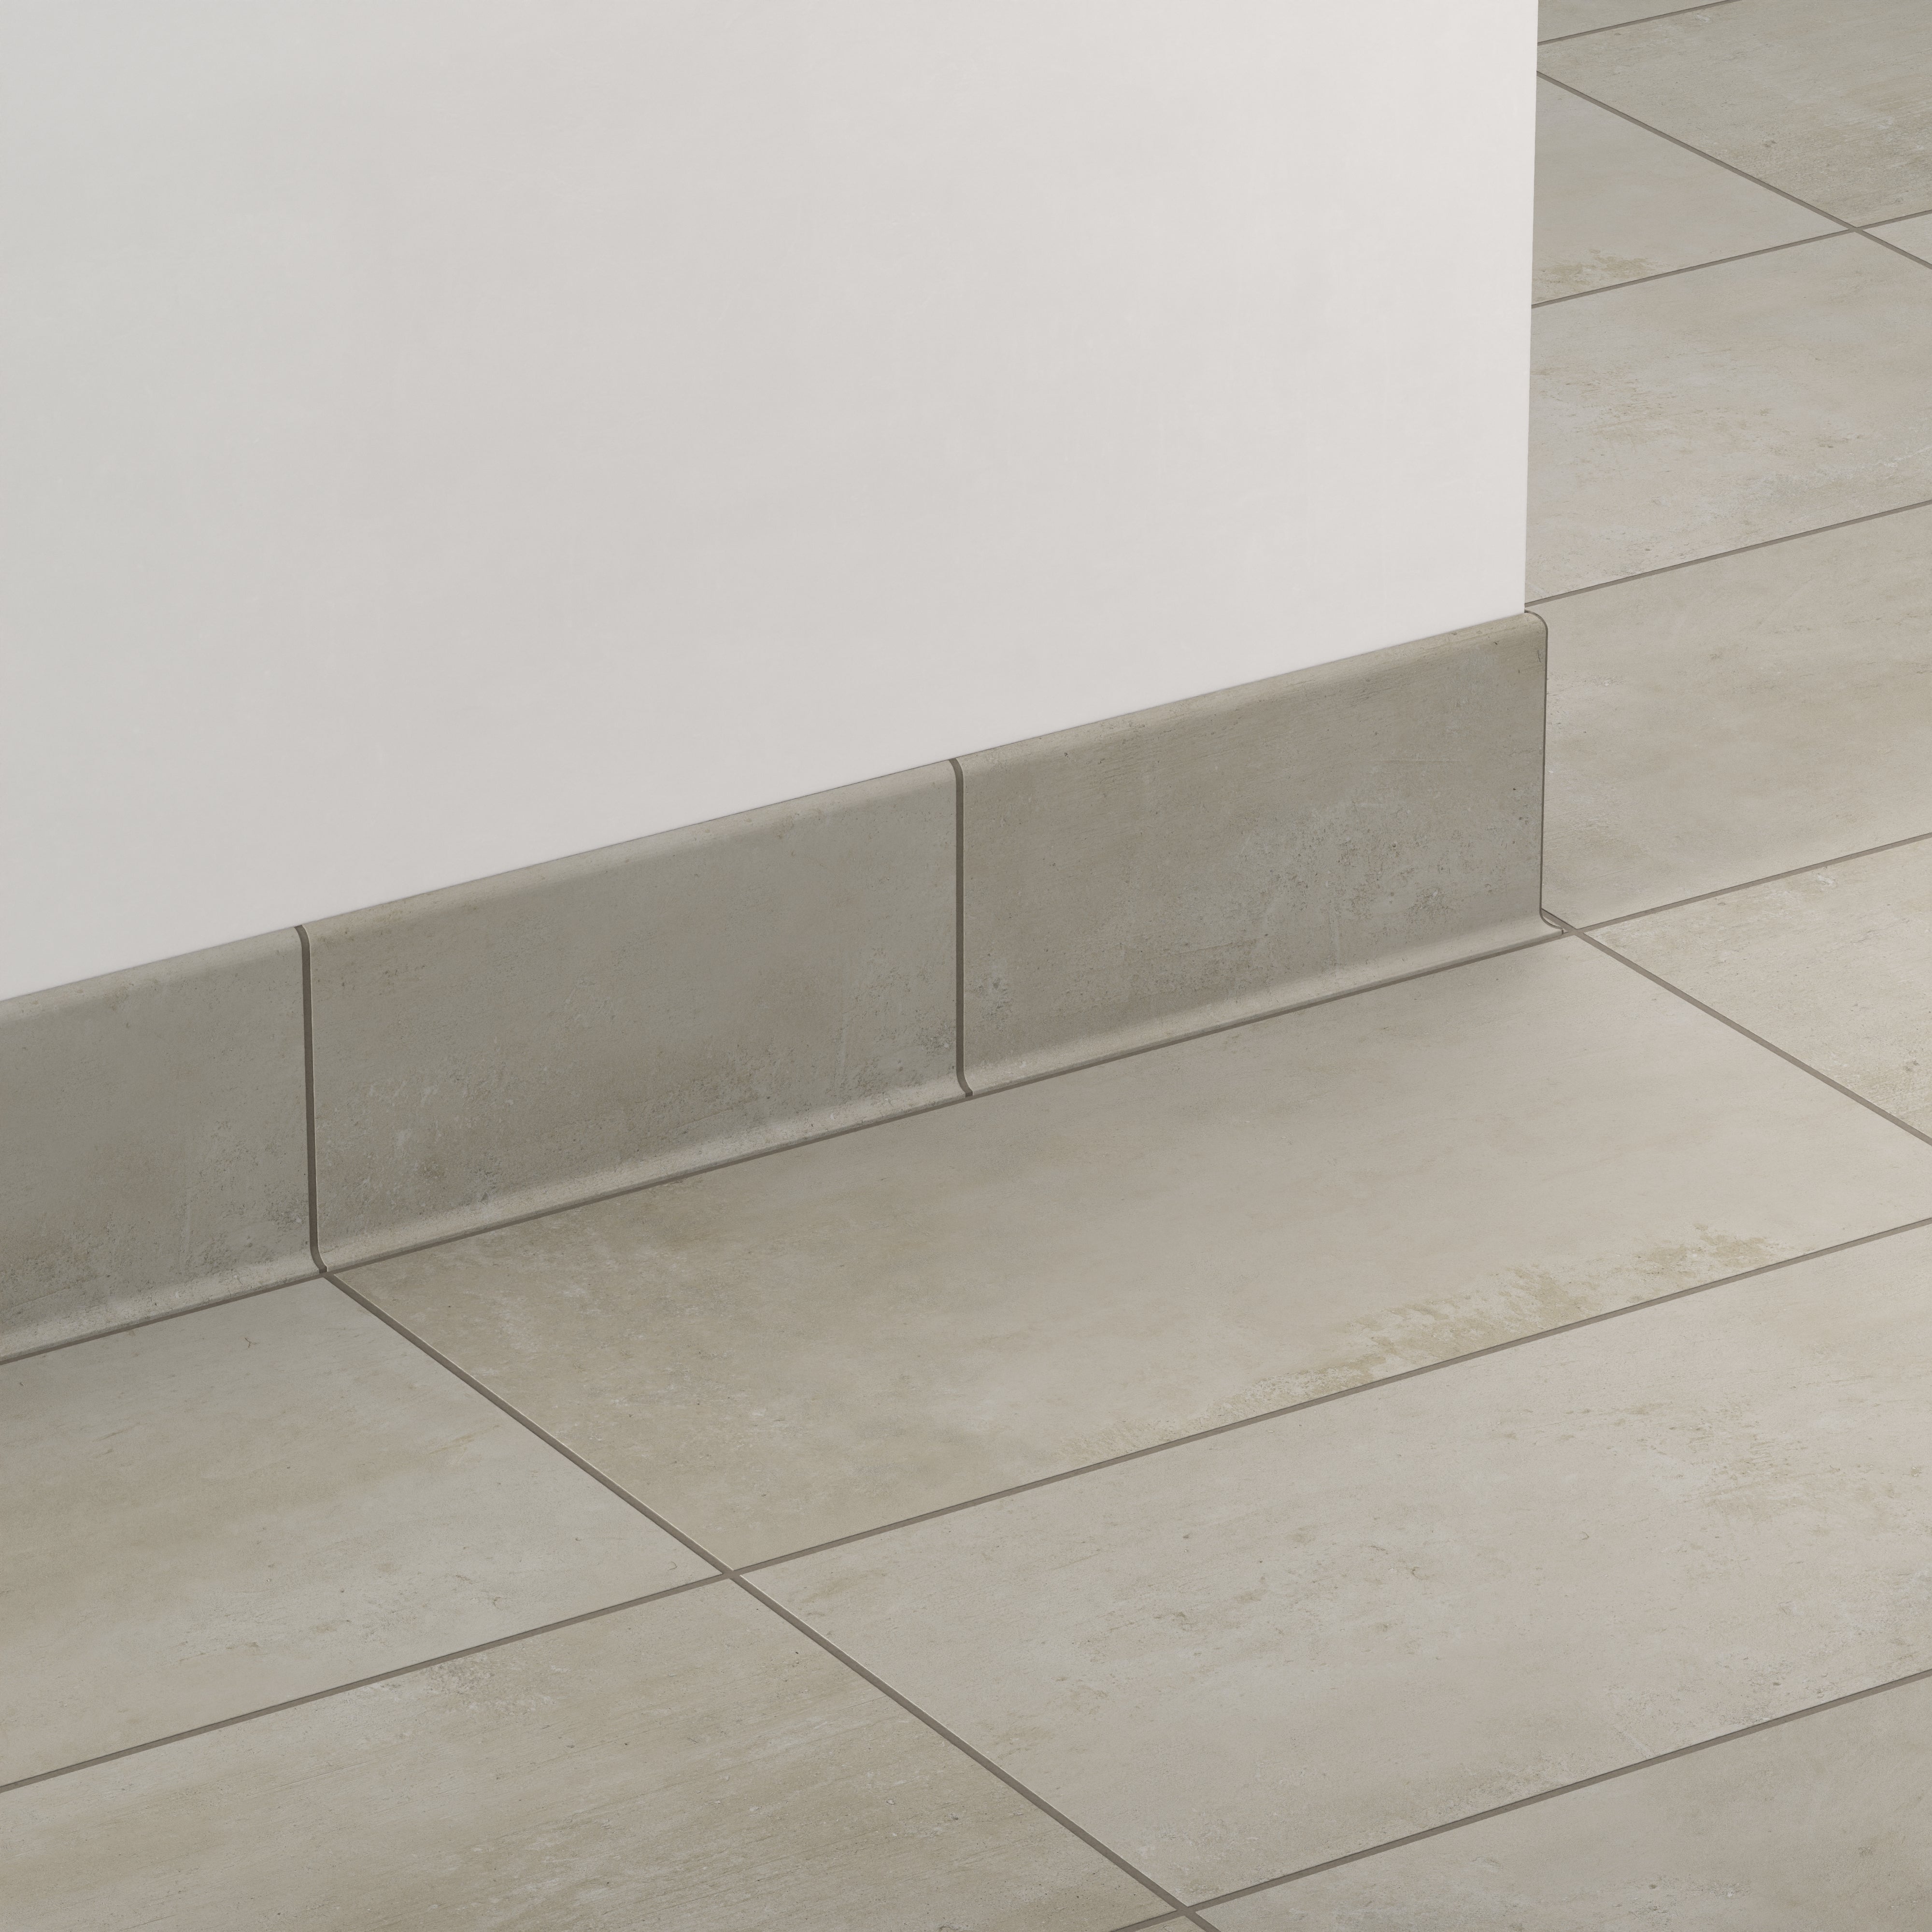 Ramsey 6x12 Matte Porcelain Cove Base Tile in Putty